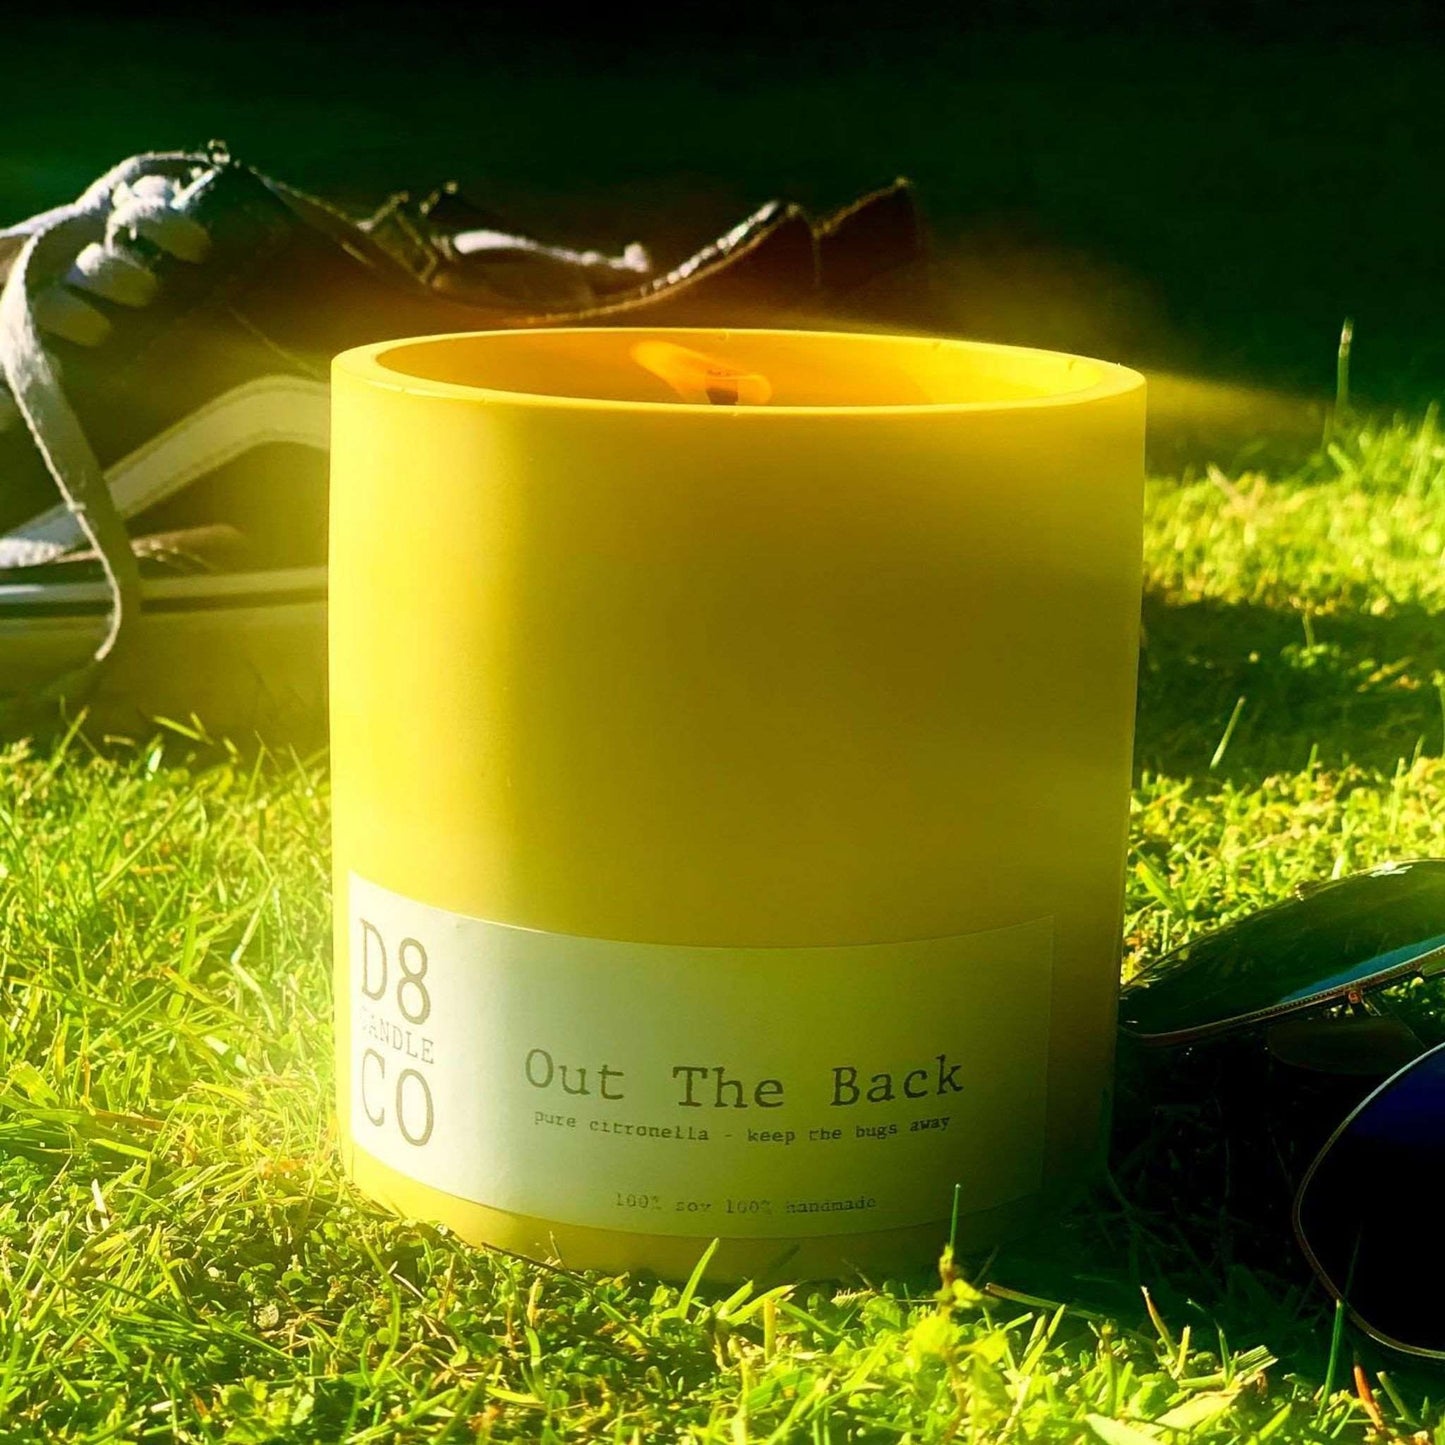 D8 Candle Co. Candles Out the Back Citronella Candle - D8 Candle Co.